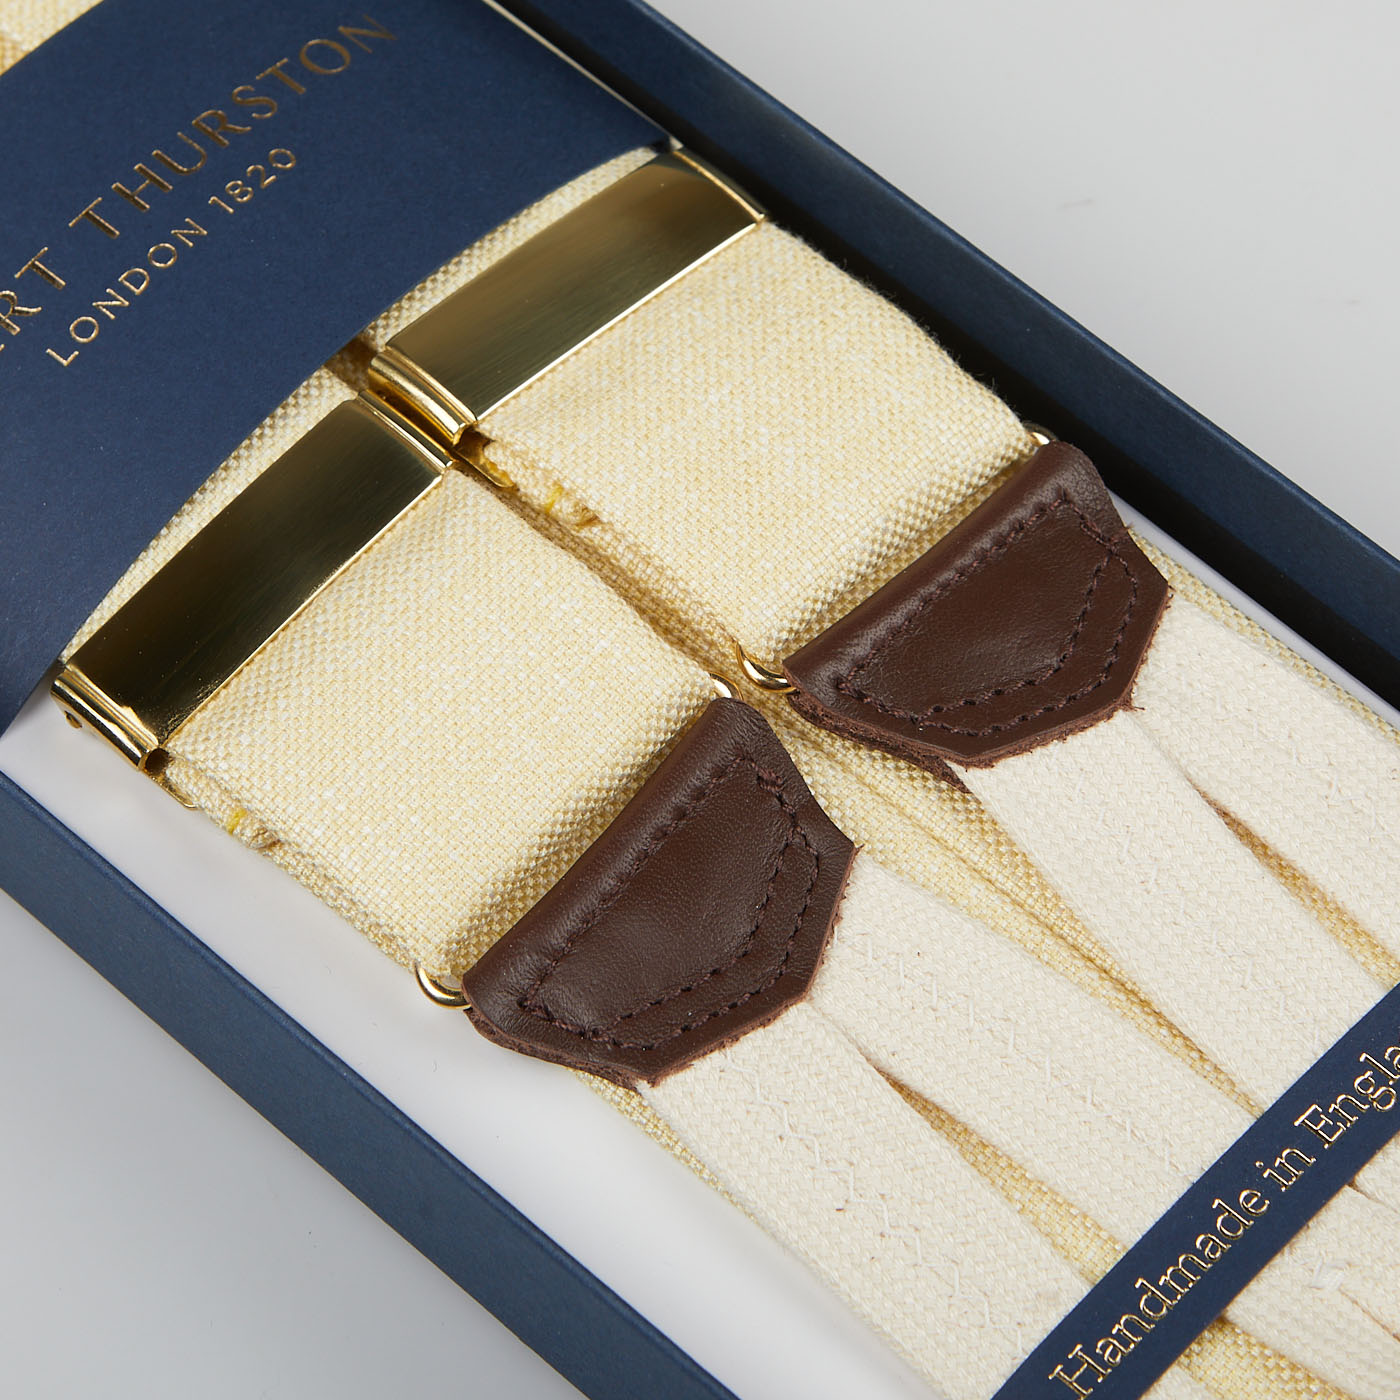 A boxed set of Cream Hemp Leather 35 mm Braces crafted from cream pure hemp, featuring brown leather accents and gold hardware. Labeled "Albert Thurston," the text at the bottom proudly reads "Handmade in England.